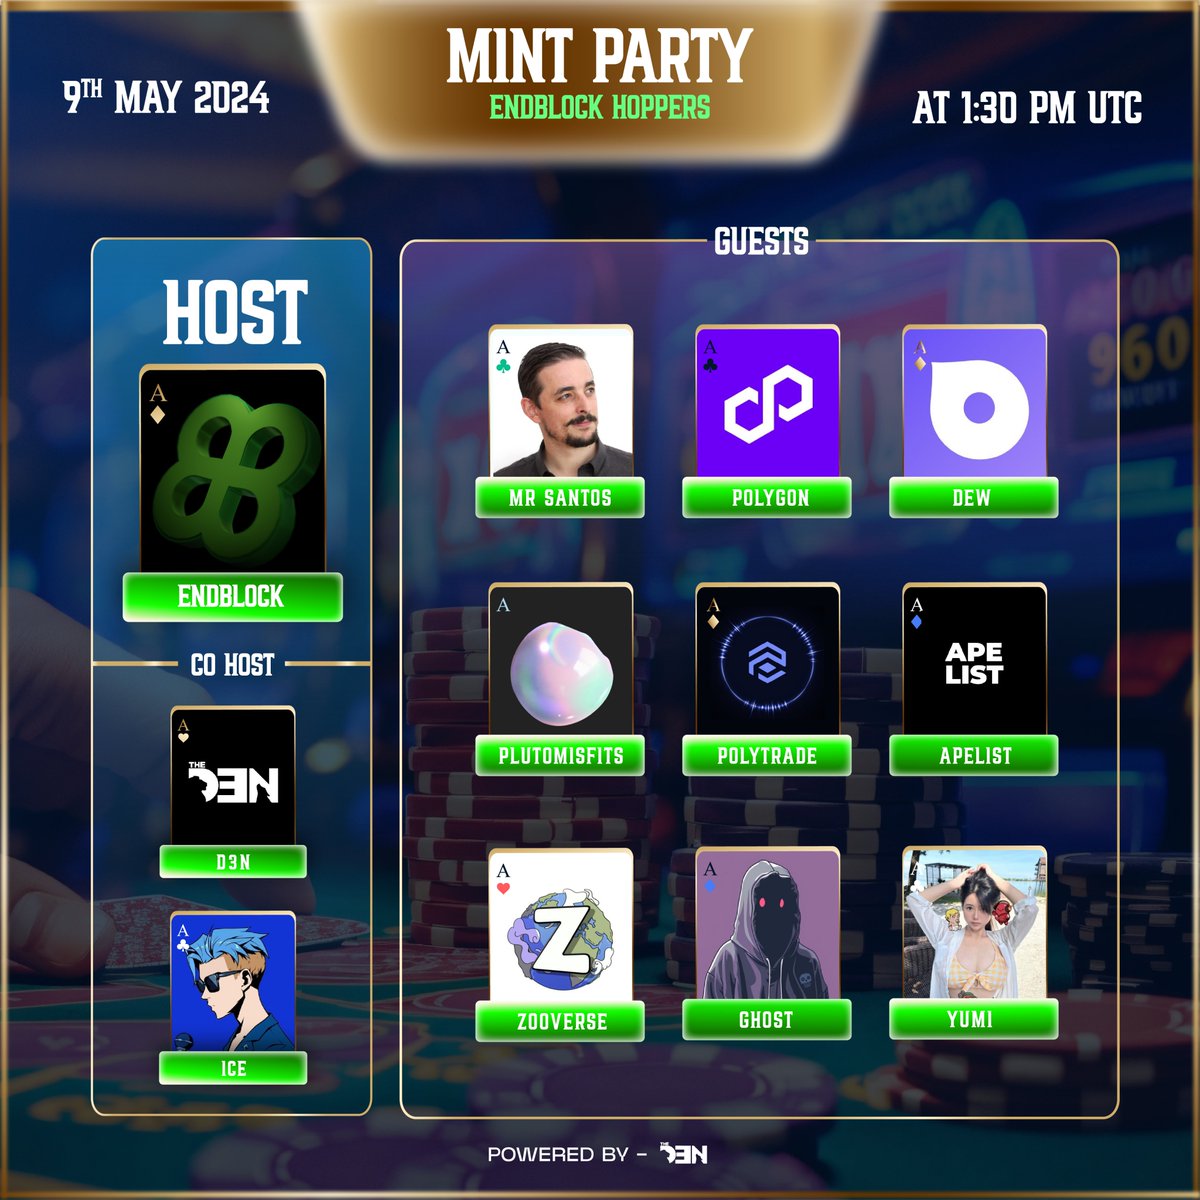 ♦️MINT DAY IS HERE ♦️ Join Endblock's mint party today at 1:30 PM UTC to witness the launch of our new collection The Hoppers with our Founder @mrsantoscoach and Co-Hosts @ice_nfts @thed3n_ And our esteemed guests @0xPolygon @Dew_HQ @plutomisfits @Polytrade_fin @TheApeList_